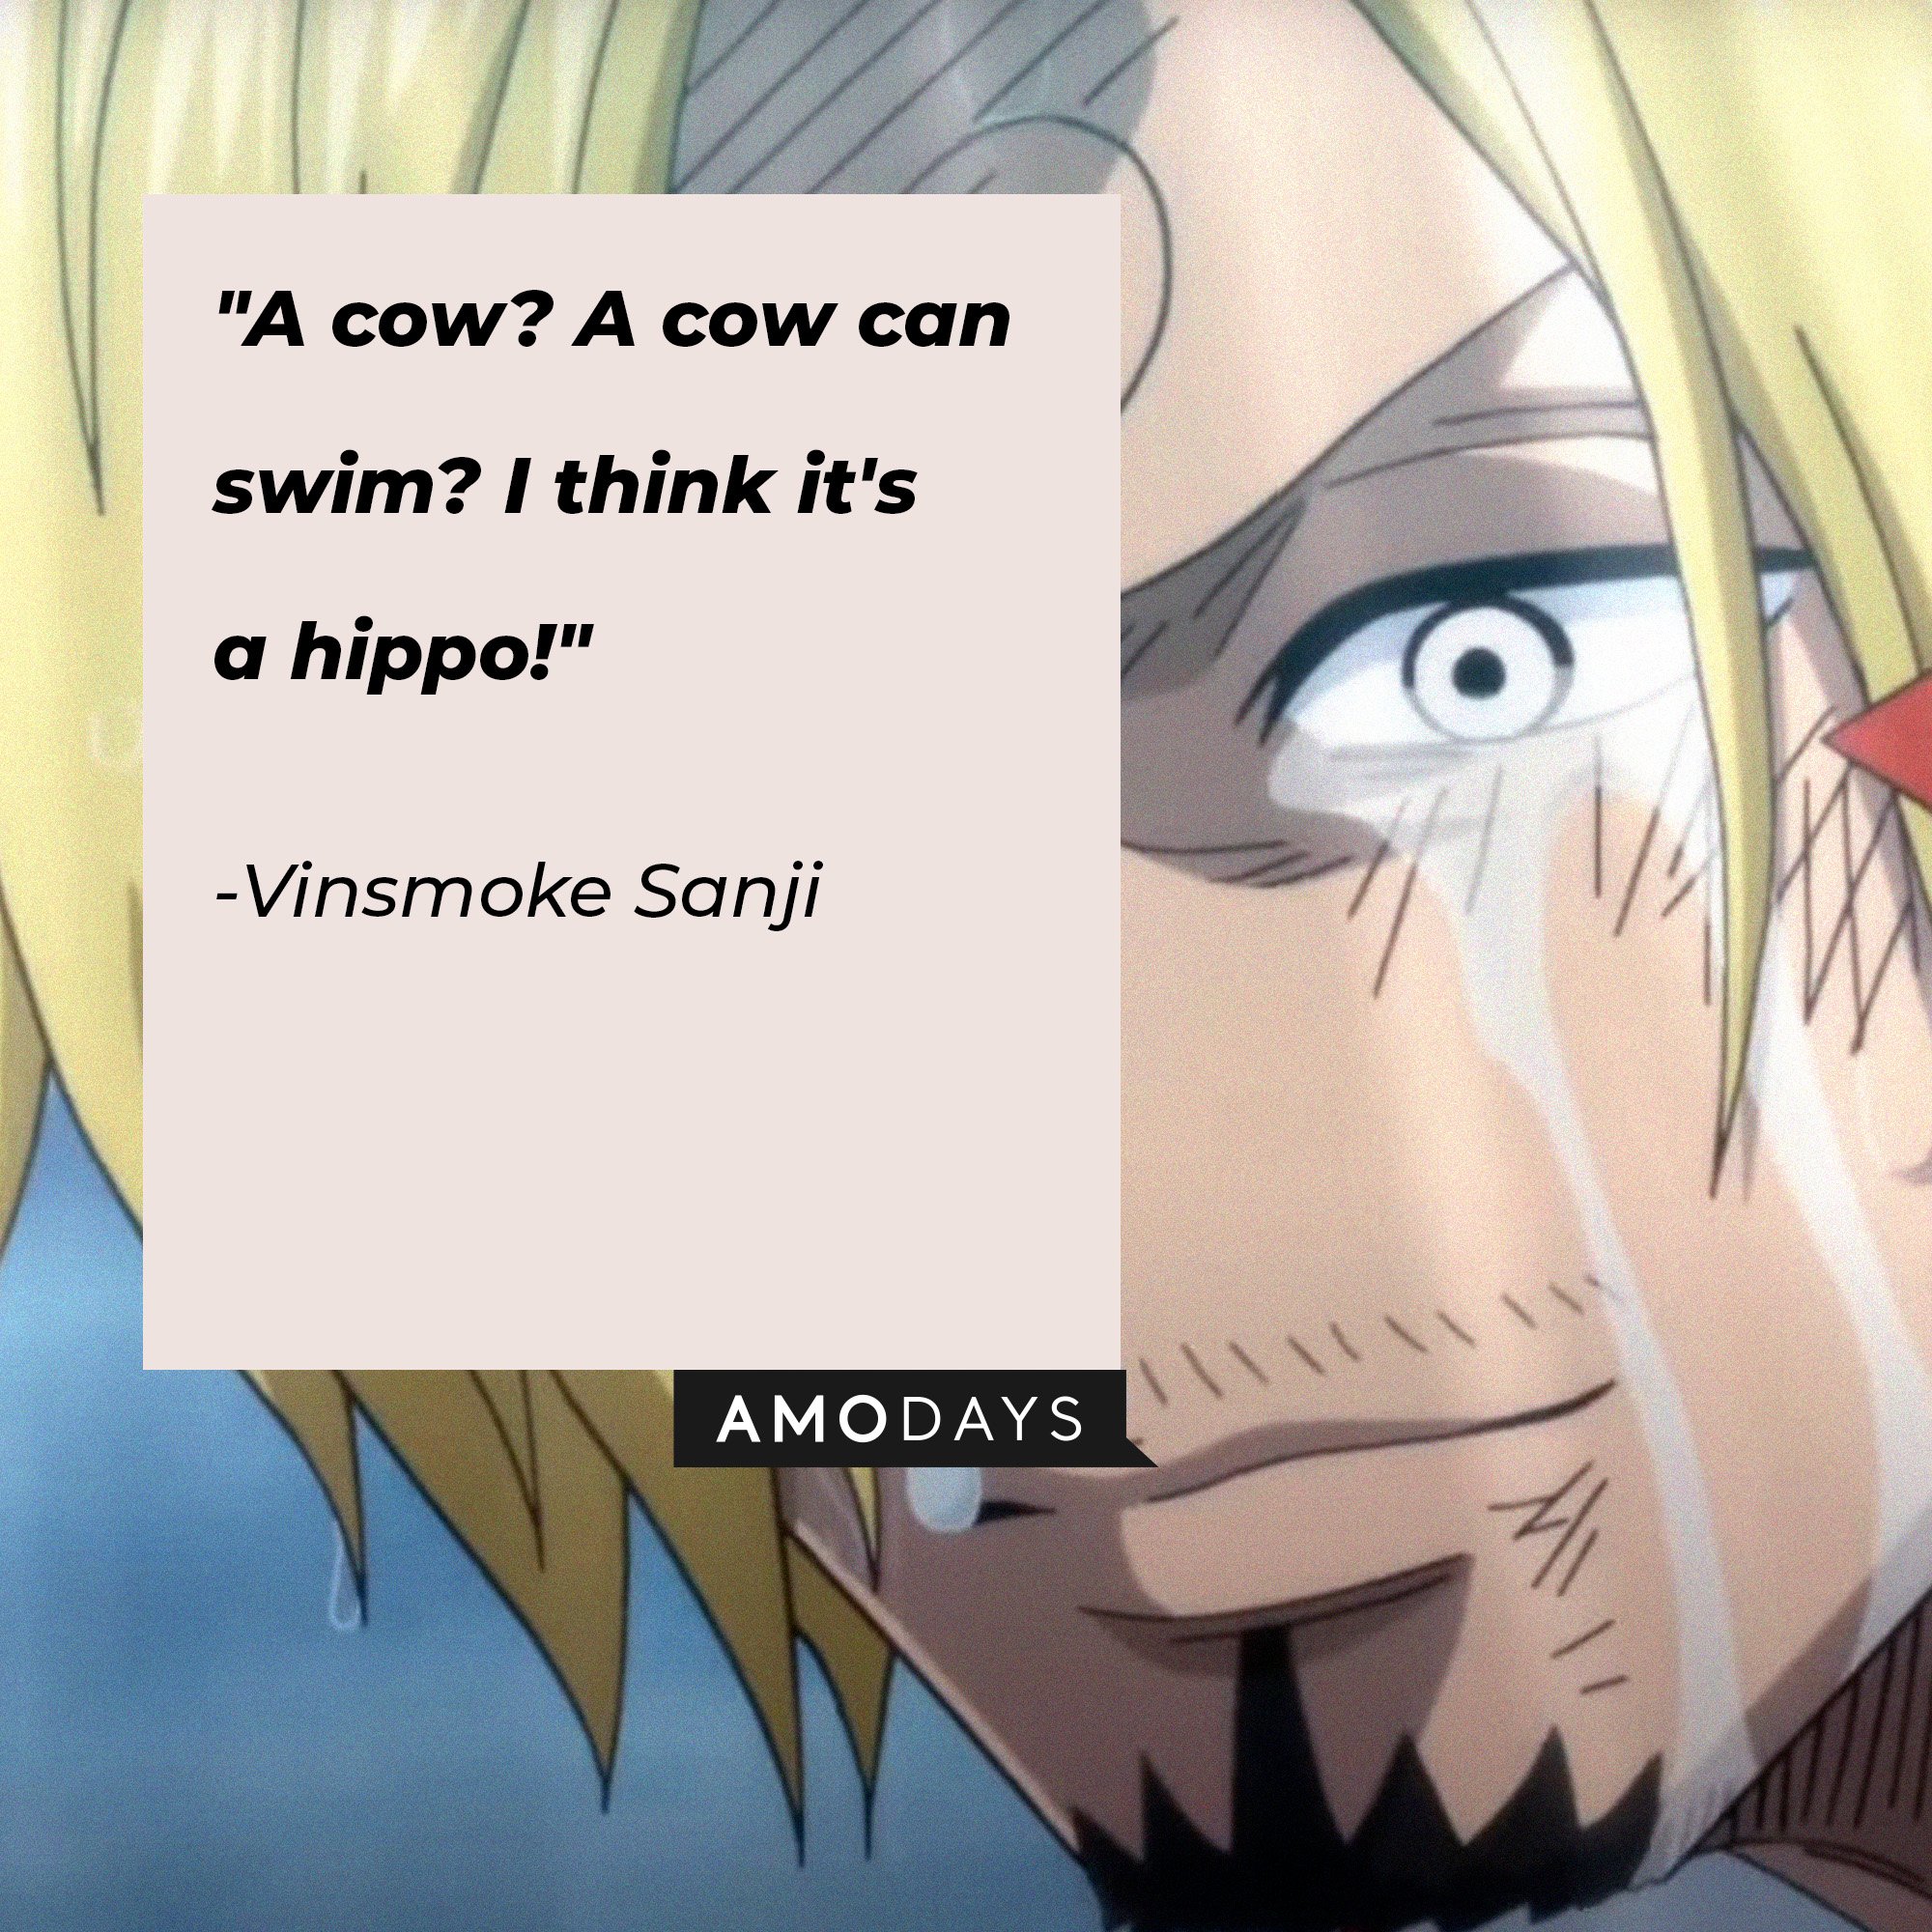 Vinsmoke Sanji's quote: "A cow? A cow can swim? I think it's a hippo!" | Image: AmoDays